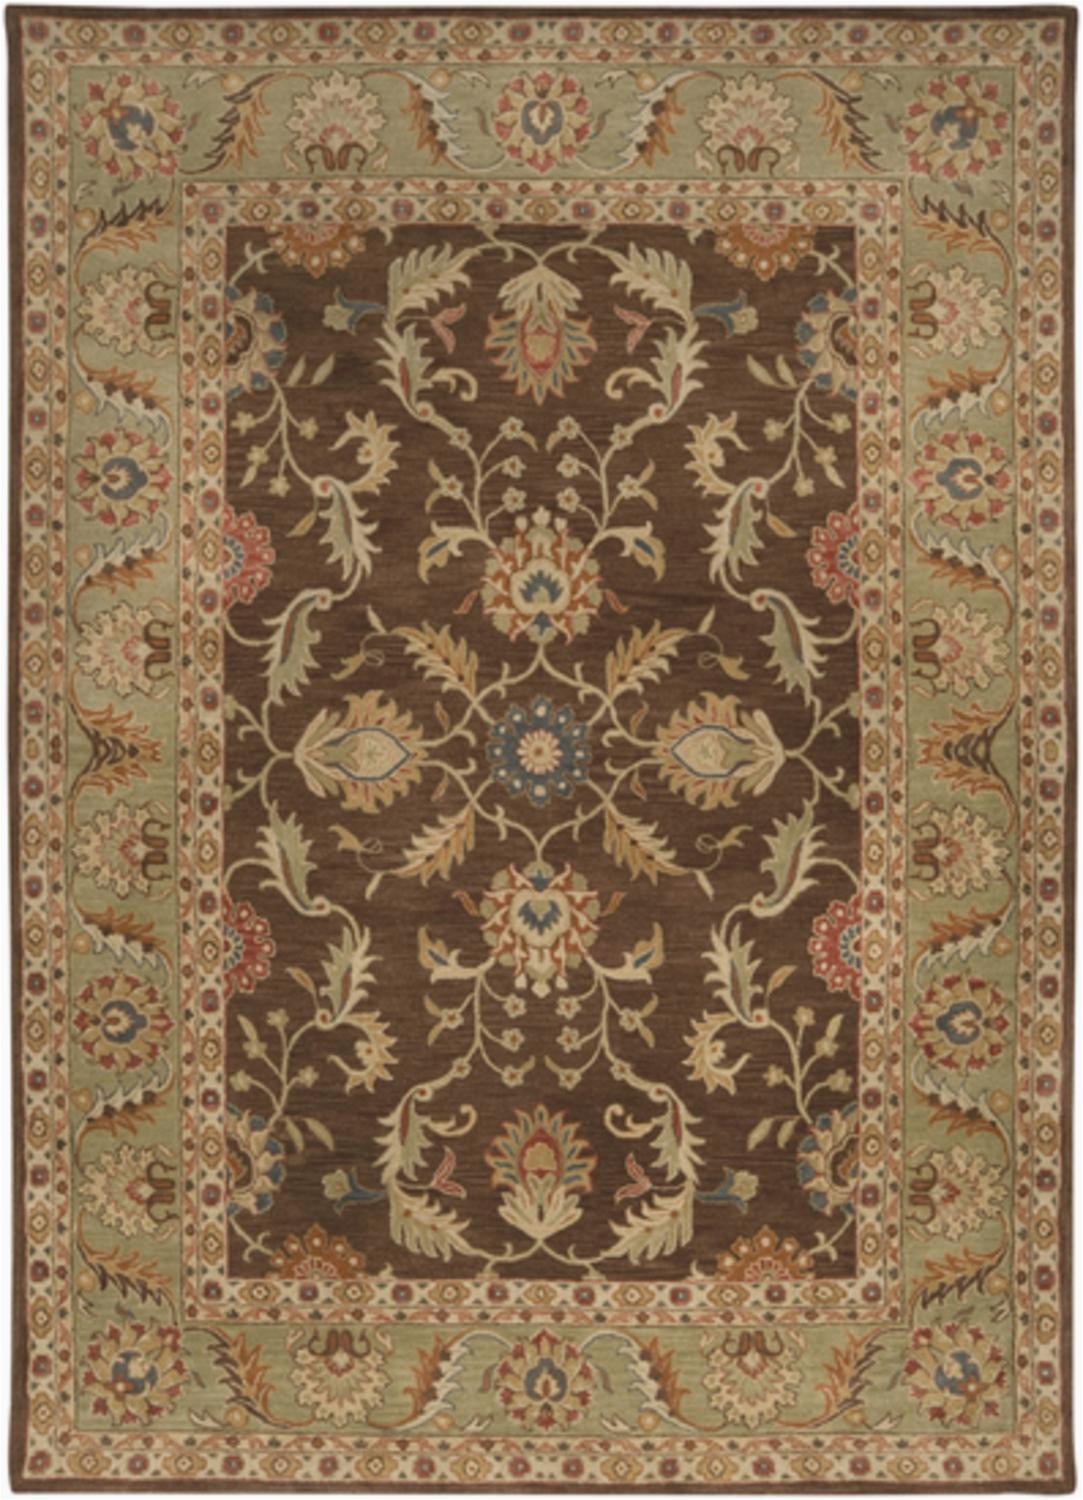 Diva at Home area Rugs 9 X 12 Vespasian Brown and Caper Green Hand Tufted Wool